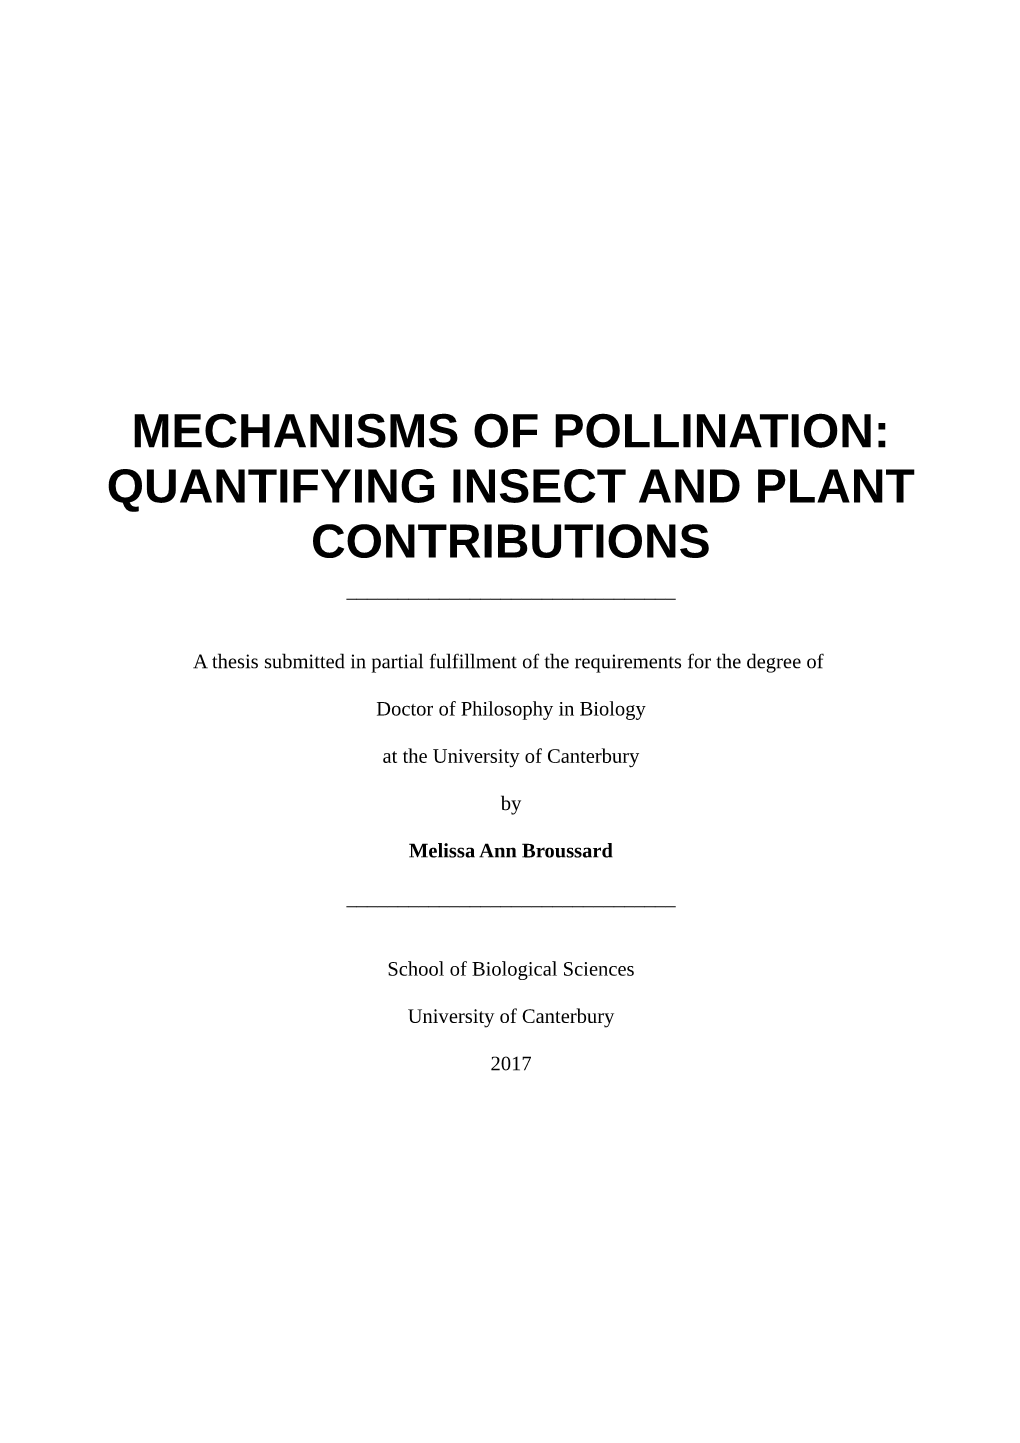 Mechanisms of Pollination: Quantifying Insect and Plant Contributions ______